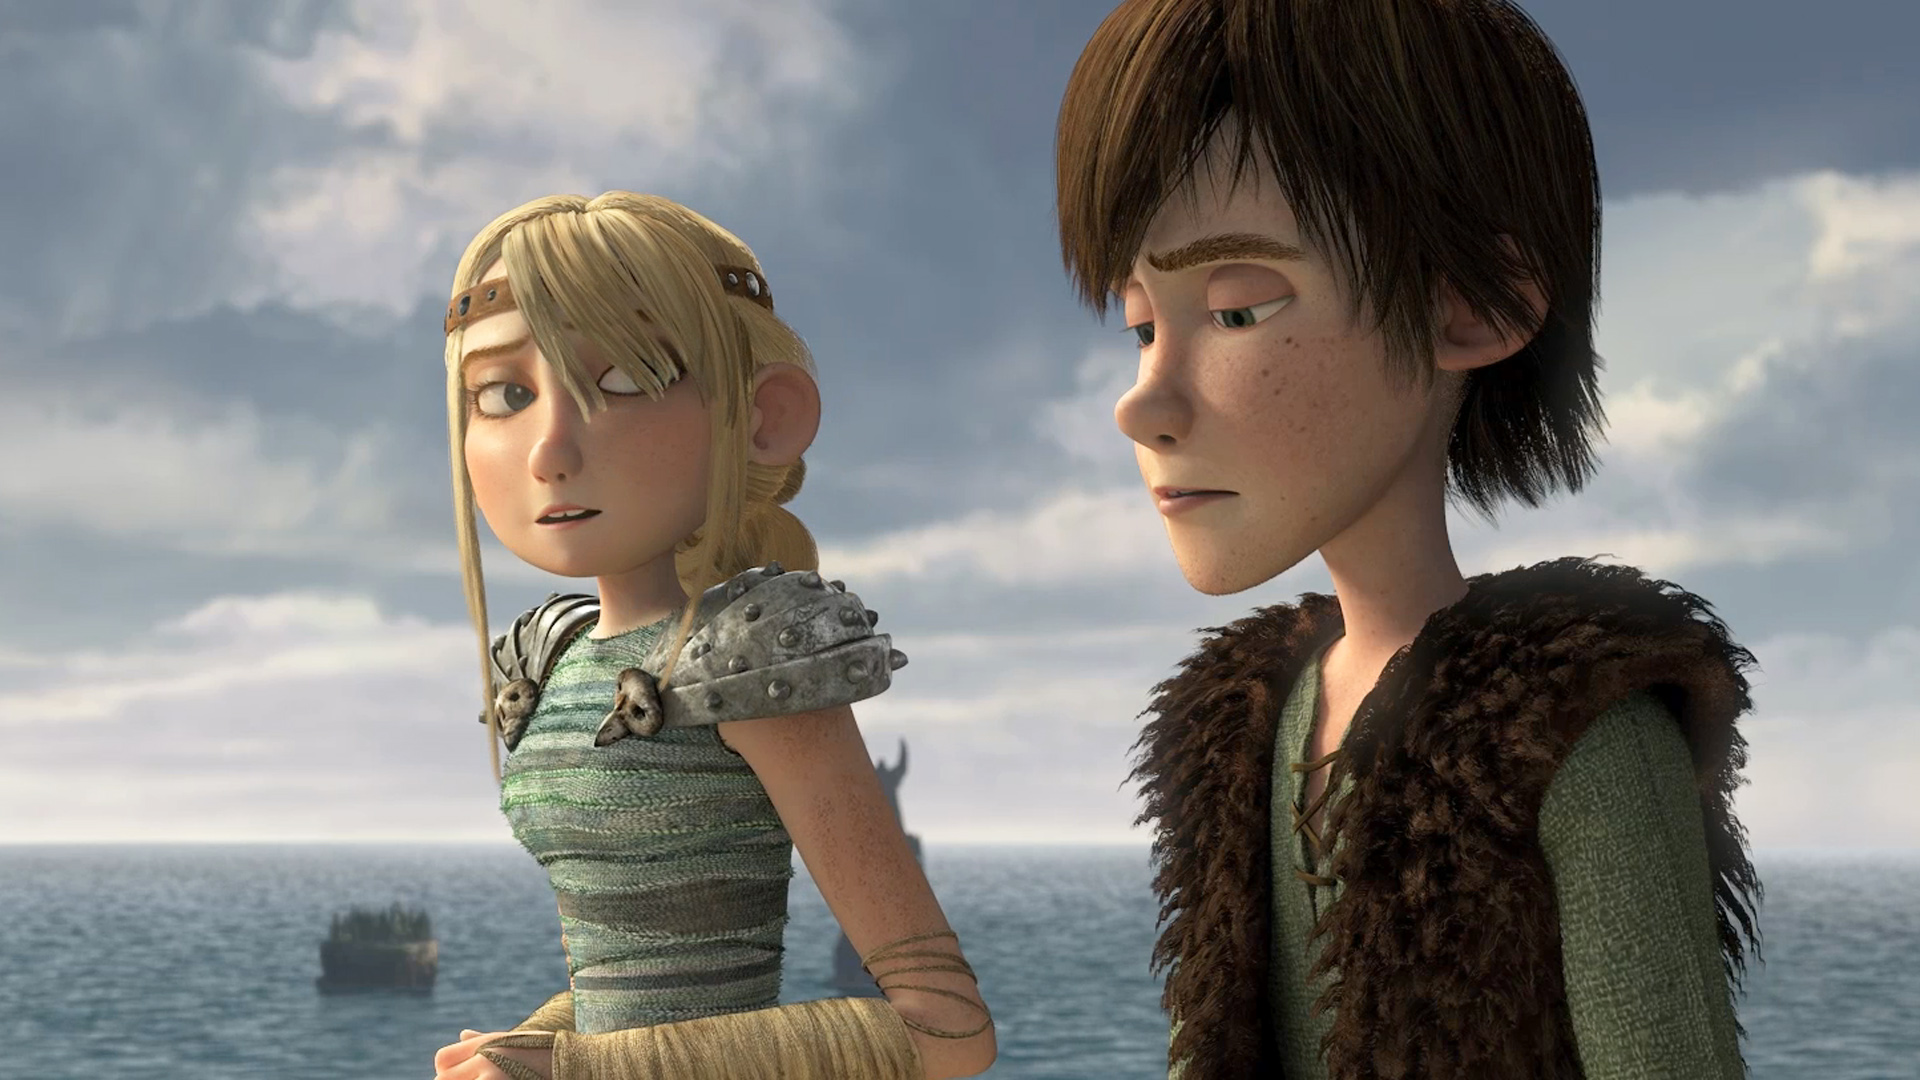 How to Train Your Dragon, Hiccup, astrid - desktop wallpaper